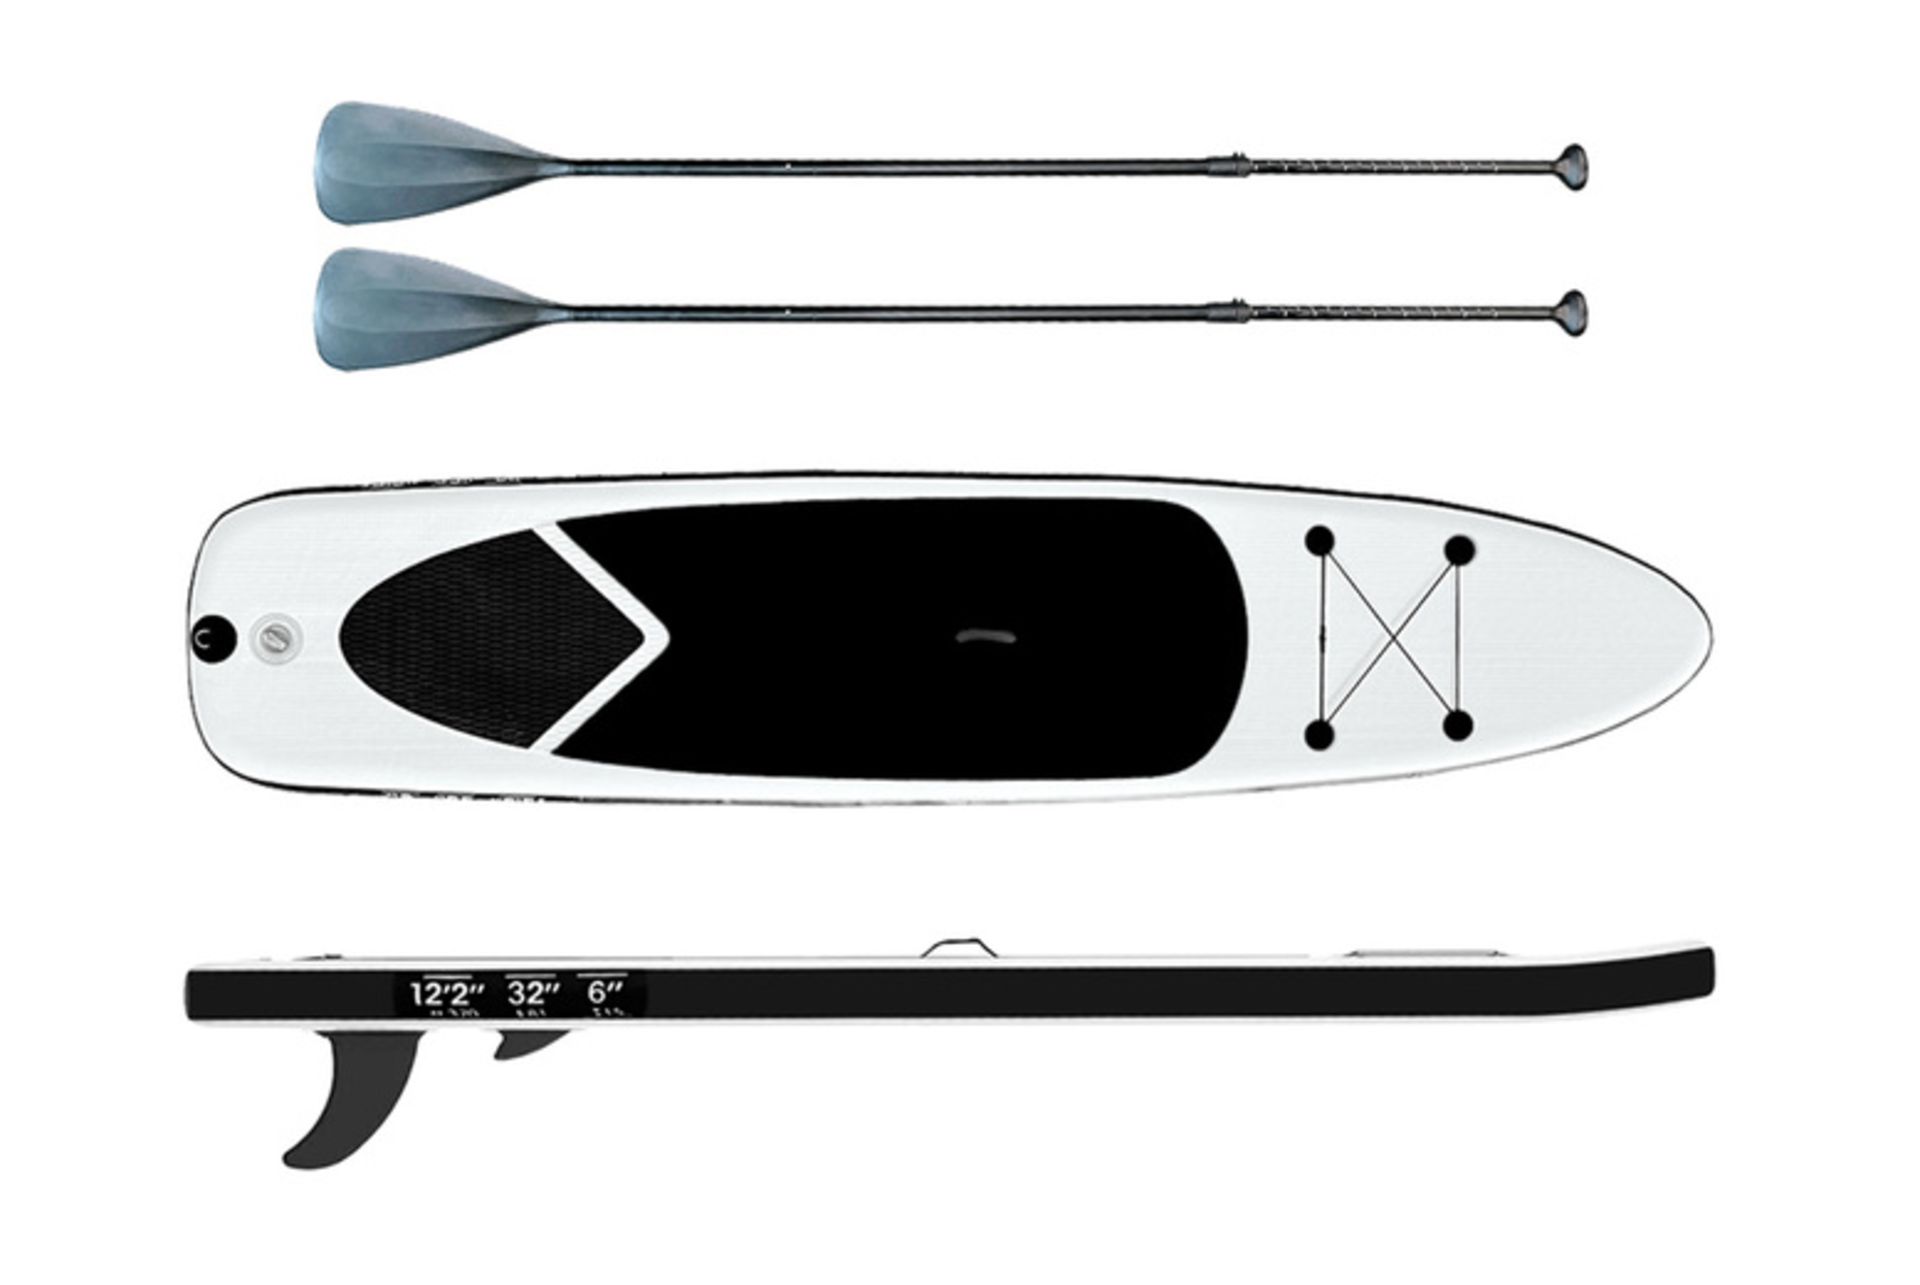 LARGE 2-PERSON INFLATABLE PADDLE BOARD W/ ACCESSORIES - BLACK